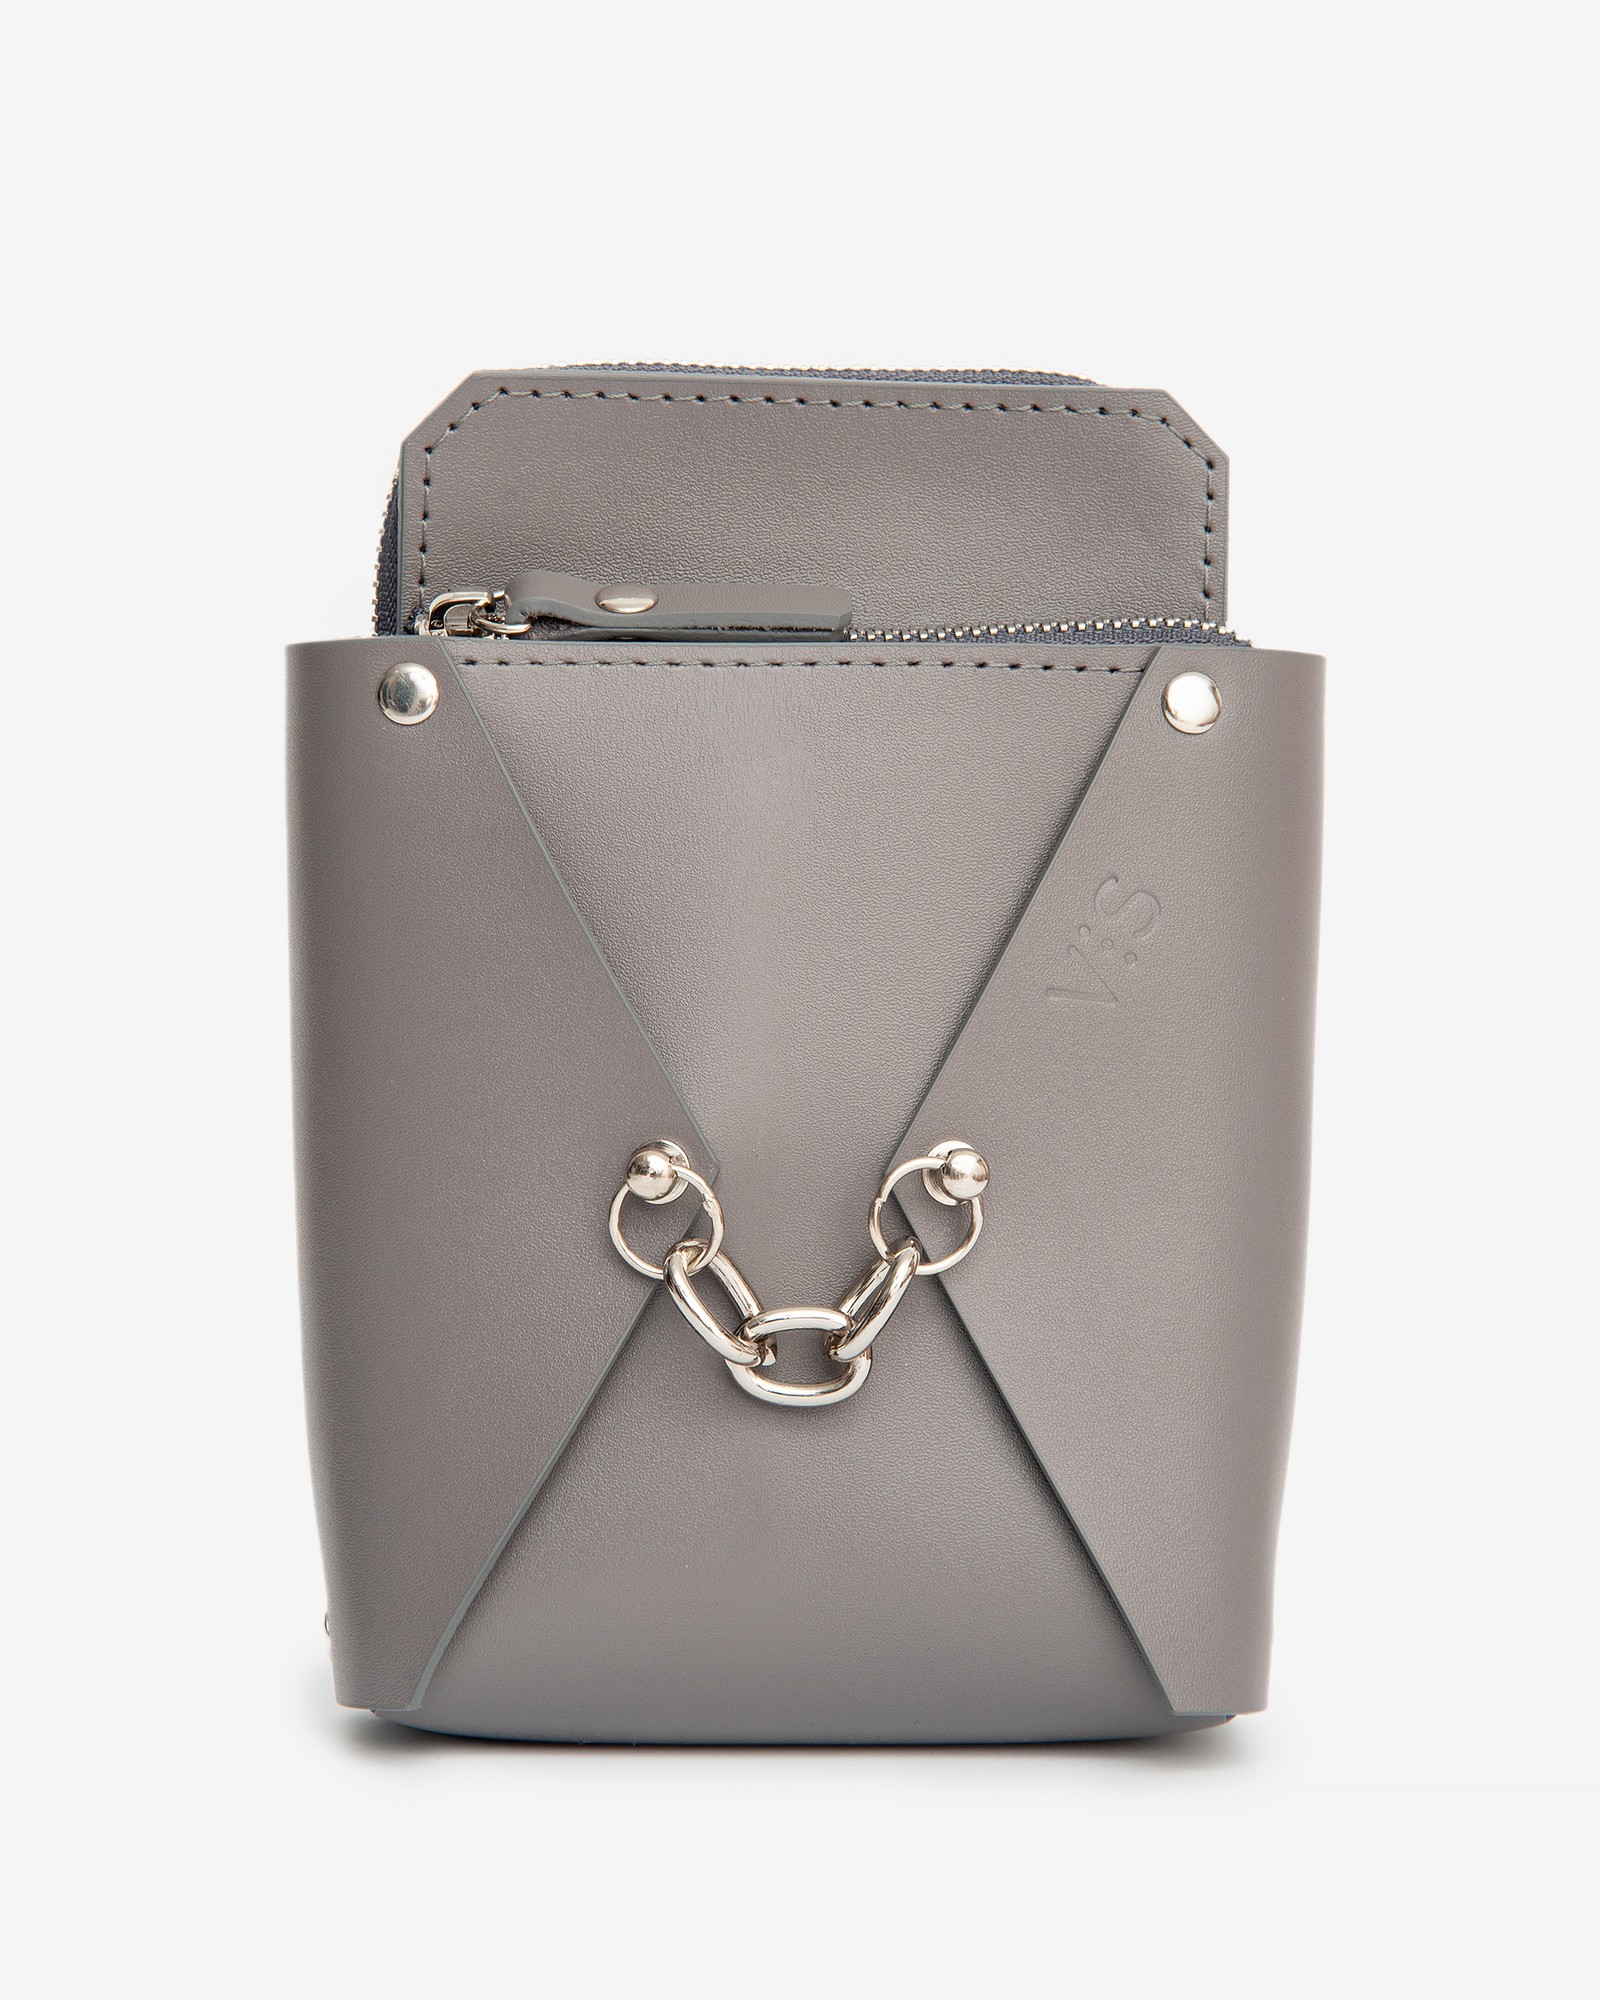 Talia leather bag in grey color